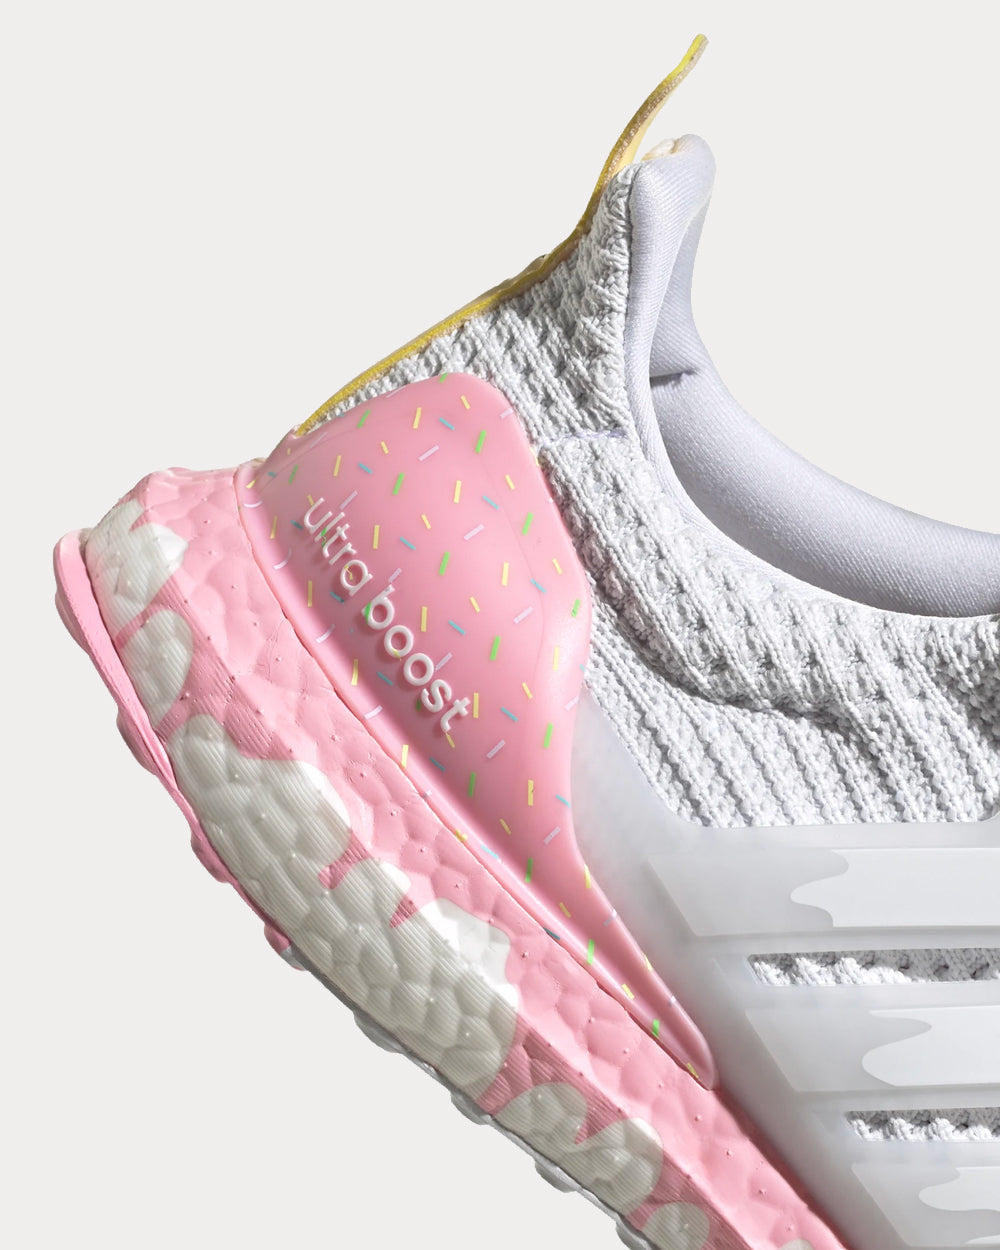 Adidas - Ultraboost DNA Cloud White / Cloud White / Light Pink Running Shoes